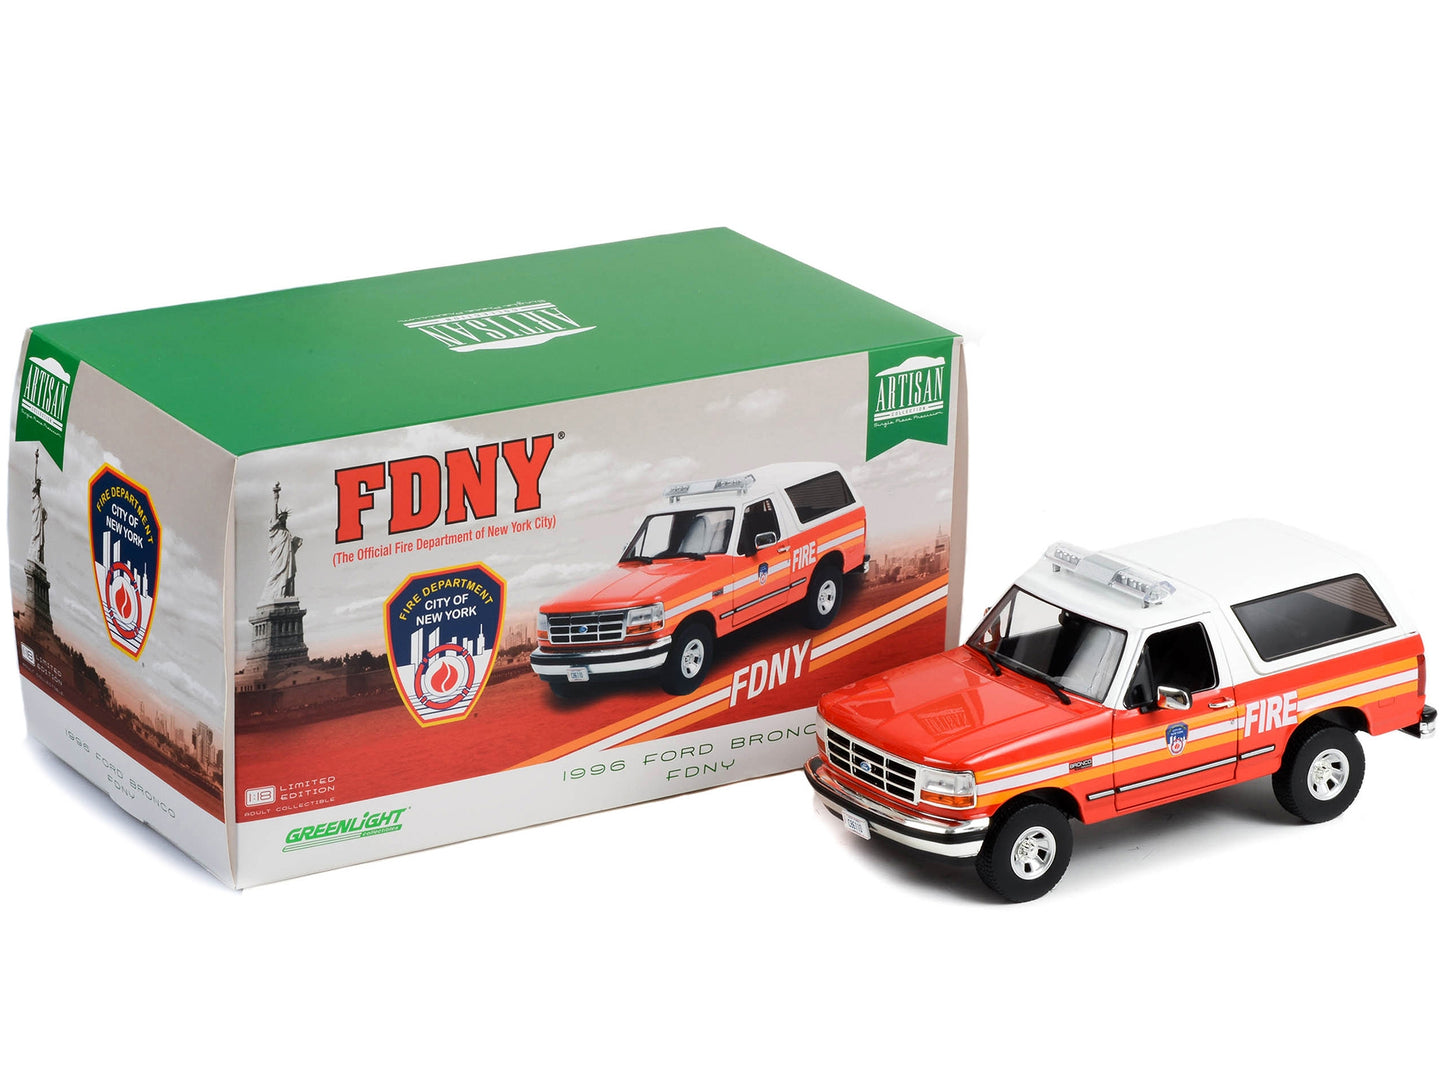 1996 Ford Bronco Police Red and White FDNY (The Official Fire Department the City of New York) "Artisan Collection" 1/18 Diecast Model Car by Greenlight